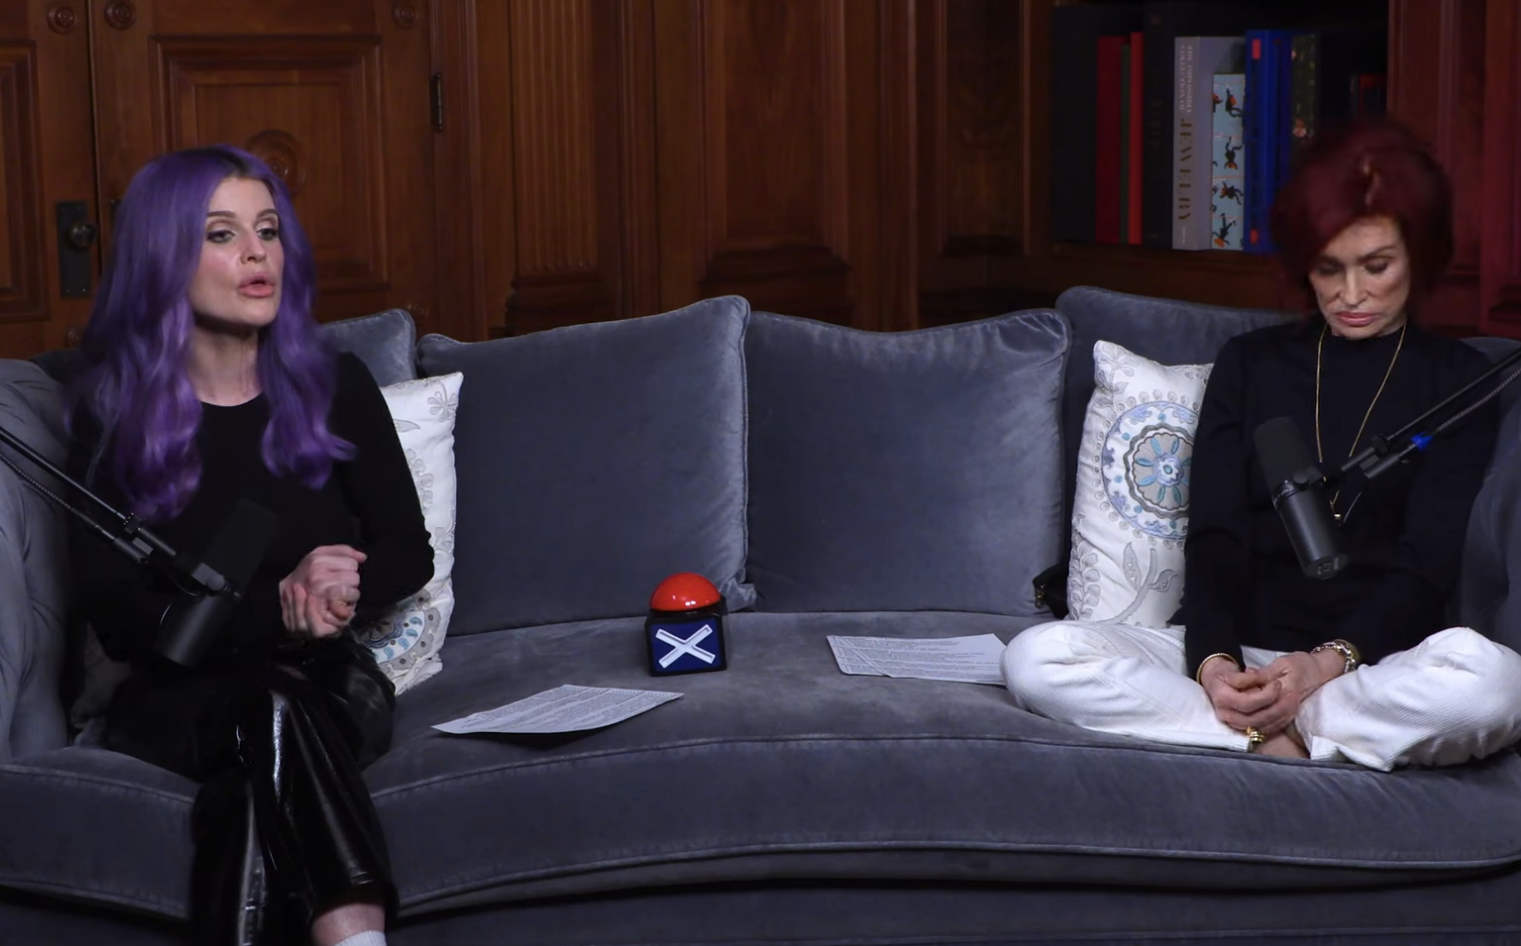 Kelly Osbourne and Ozzy Osbourne sit on a couch during an interview, demeanor relaxed and attentive